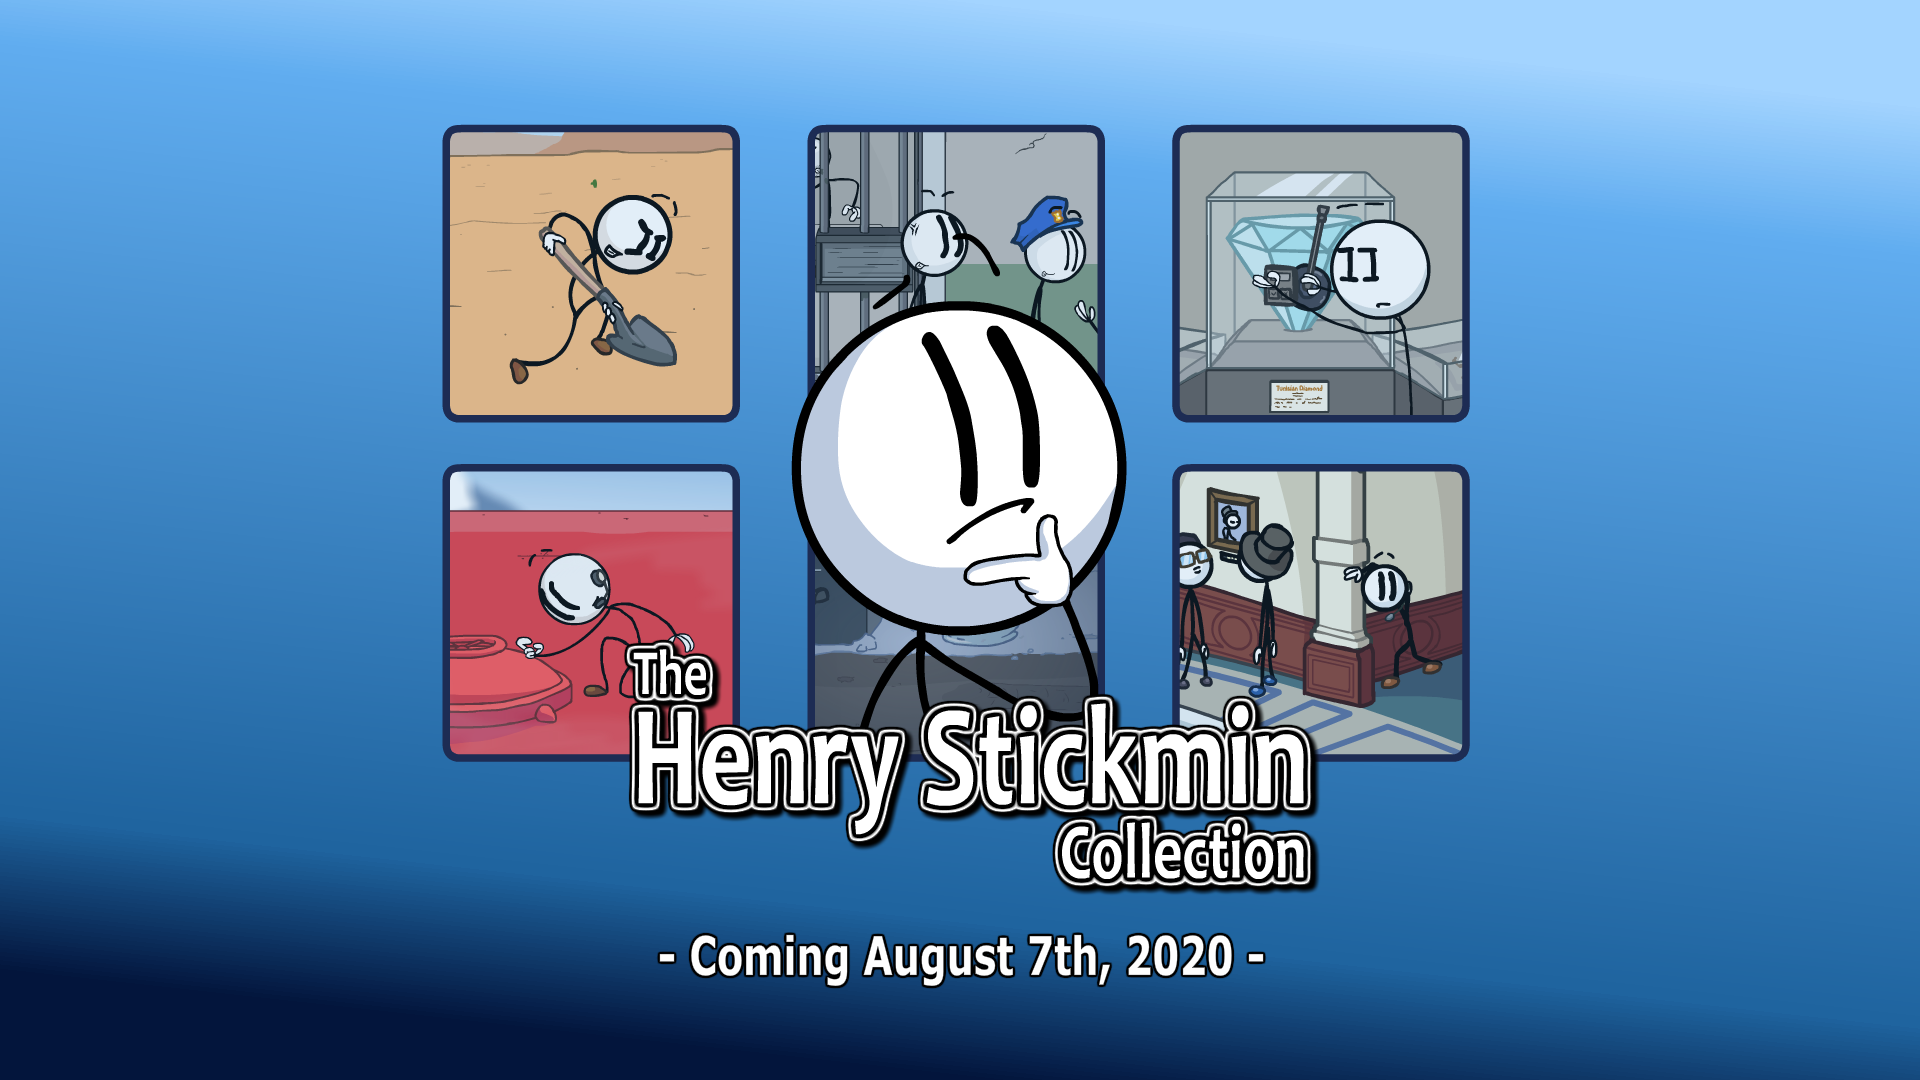 will the henry stickmin collection be free